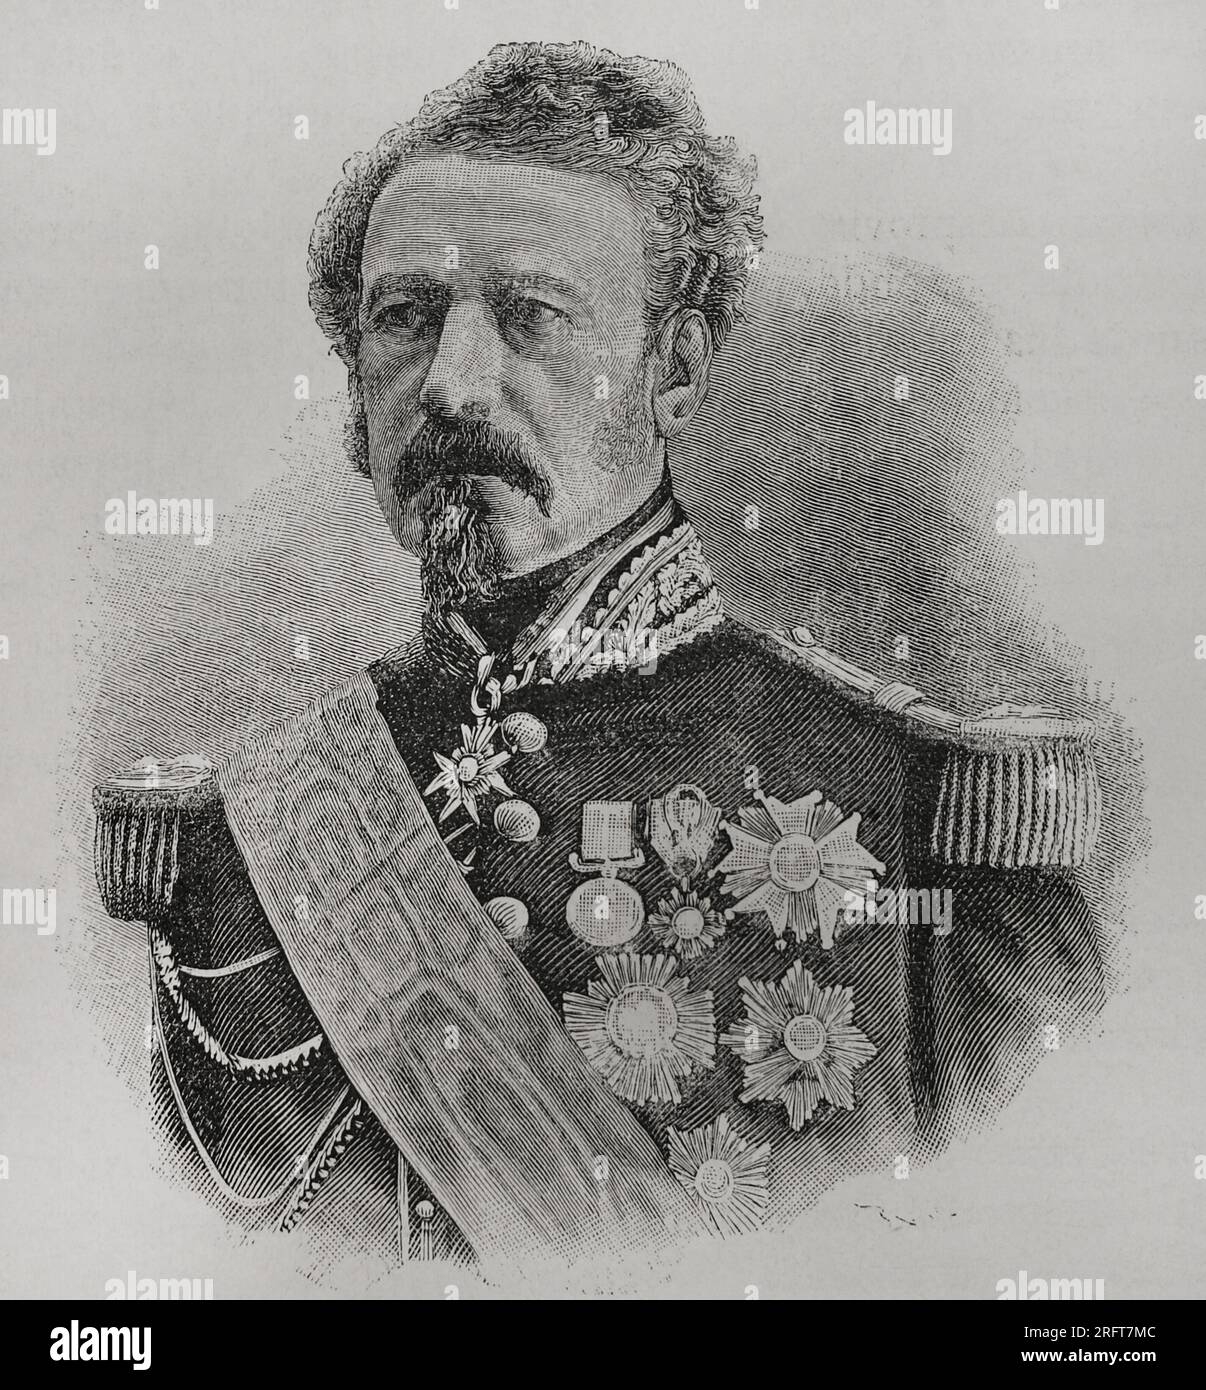 Adolphe Niel (1802-1869). French military officer and statesman. Marshal of France and minister of War. Portrait. Engraving. 'Historia de la Guerra Franco-Alemana de 1870-1871'. Published in Barcelona, 1791. Stock Photo